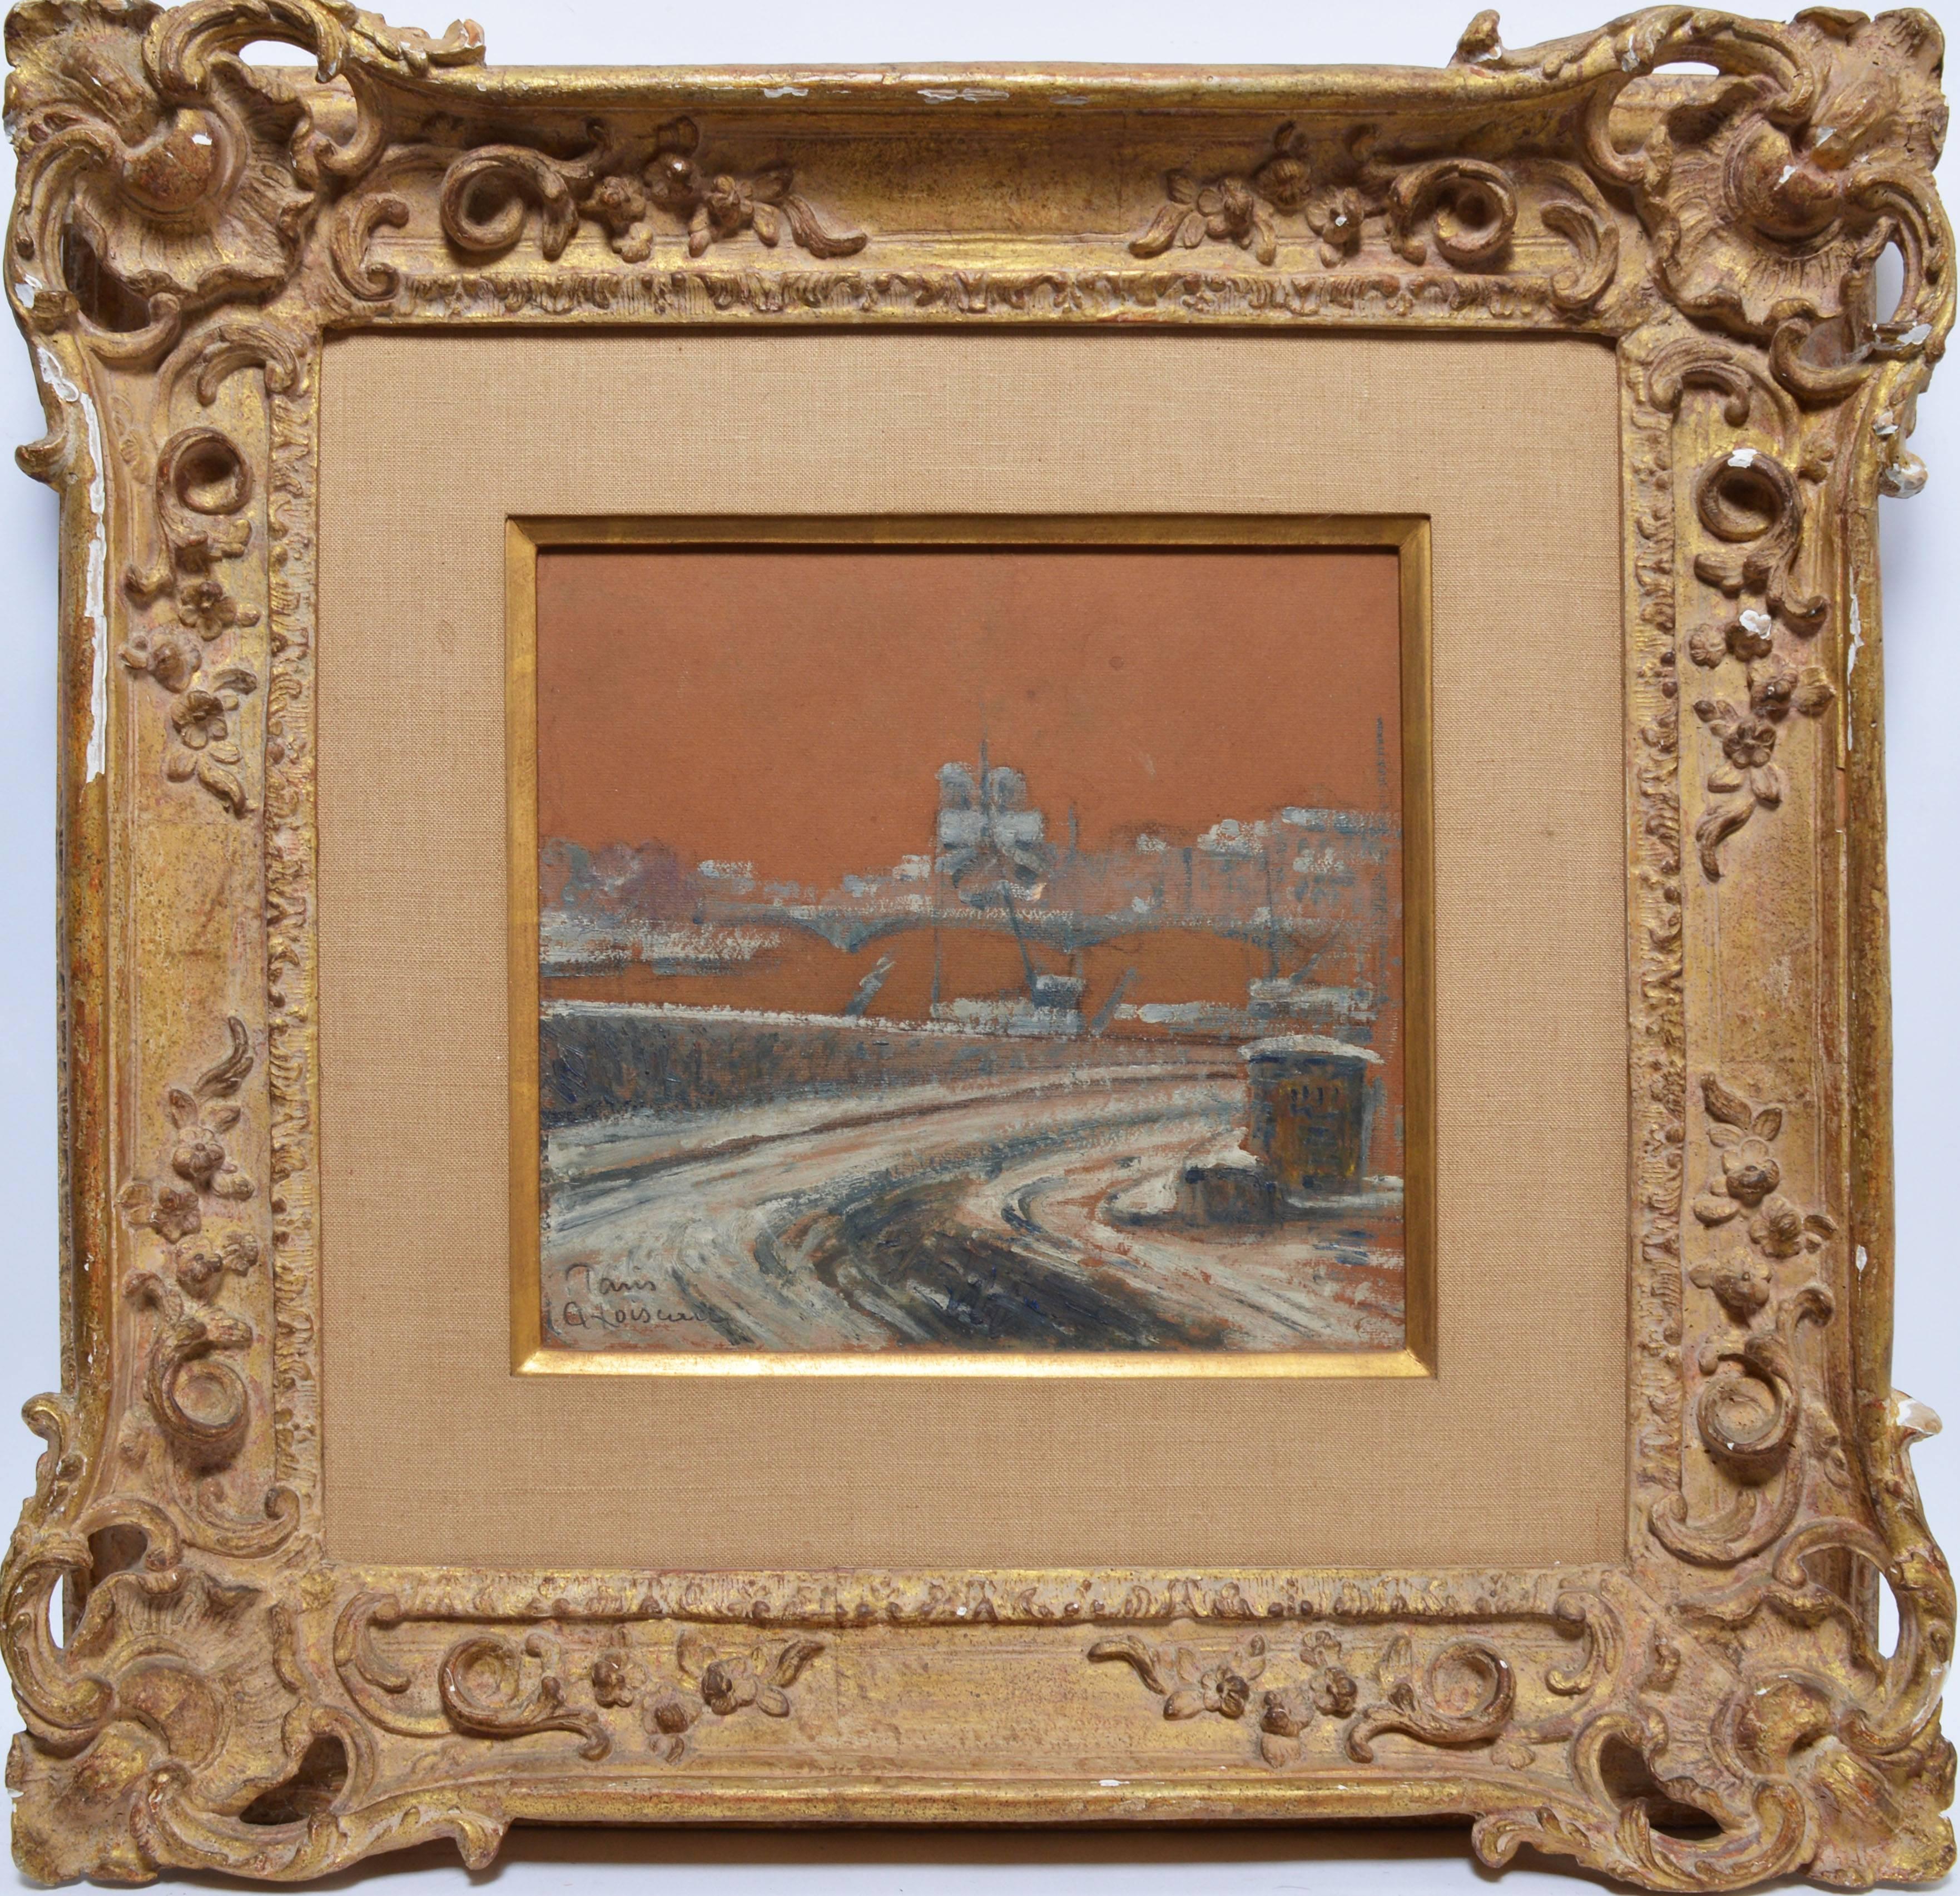 Modernist view of Paris by Gustave Loiseau  (1865 - 1935).  Oil and gouache on board, circa 1910.  Signed lower left, "G. Loiseau".  Displayed in a giltwood frame.  Image size, 9.5"L x 10.5"H, overall  21"L x 22"H.